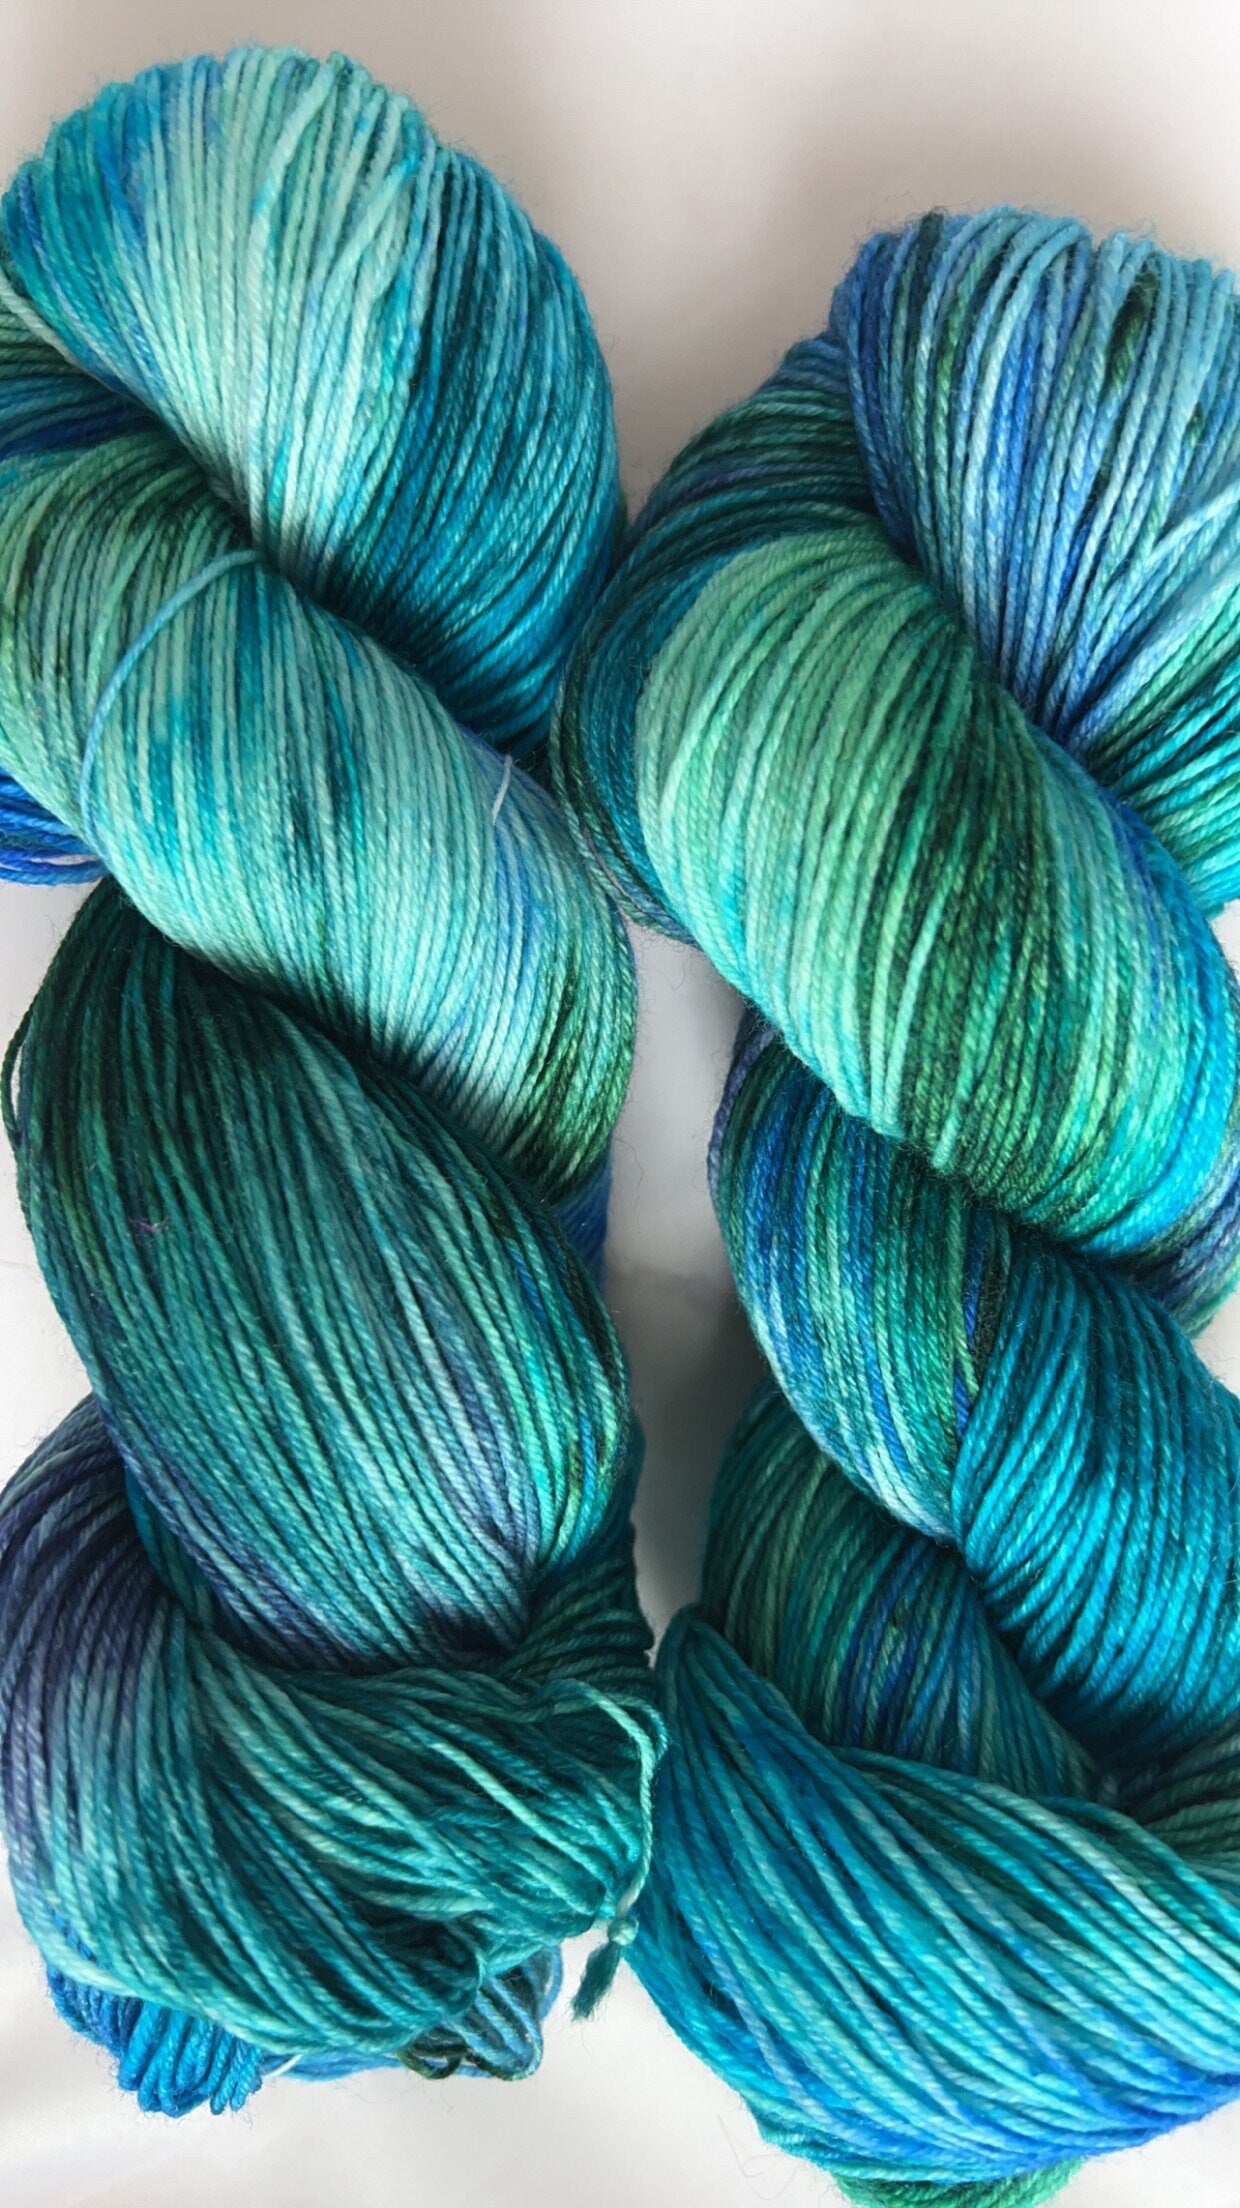 Hand-Dyed Merino Wool Yarn - Soft and Durable Yarn for Knitting and Crocheting | Indie Dyed Merino Wool | Fingering | Captain Planet